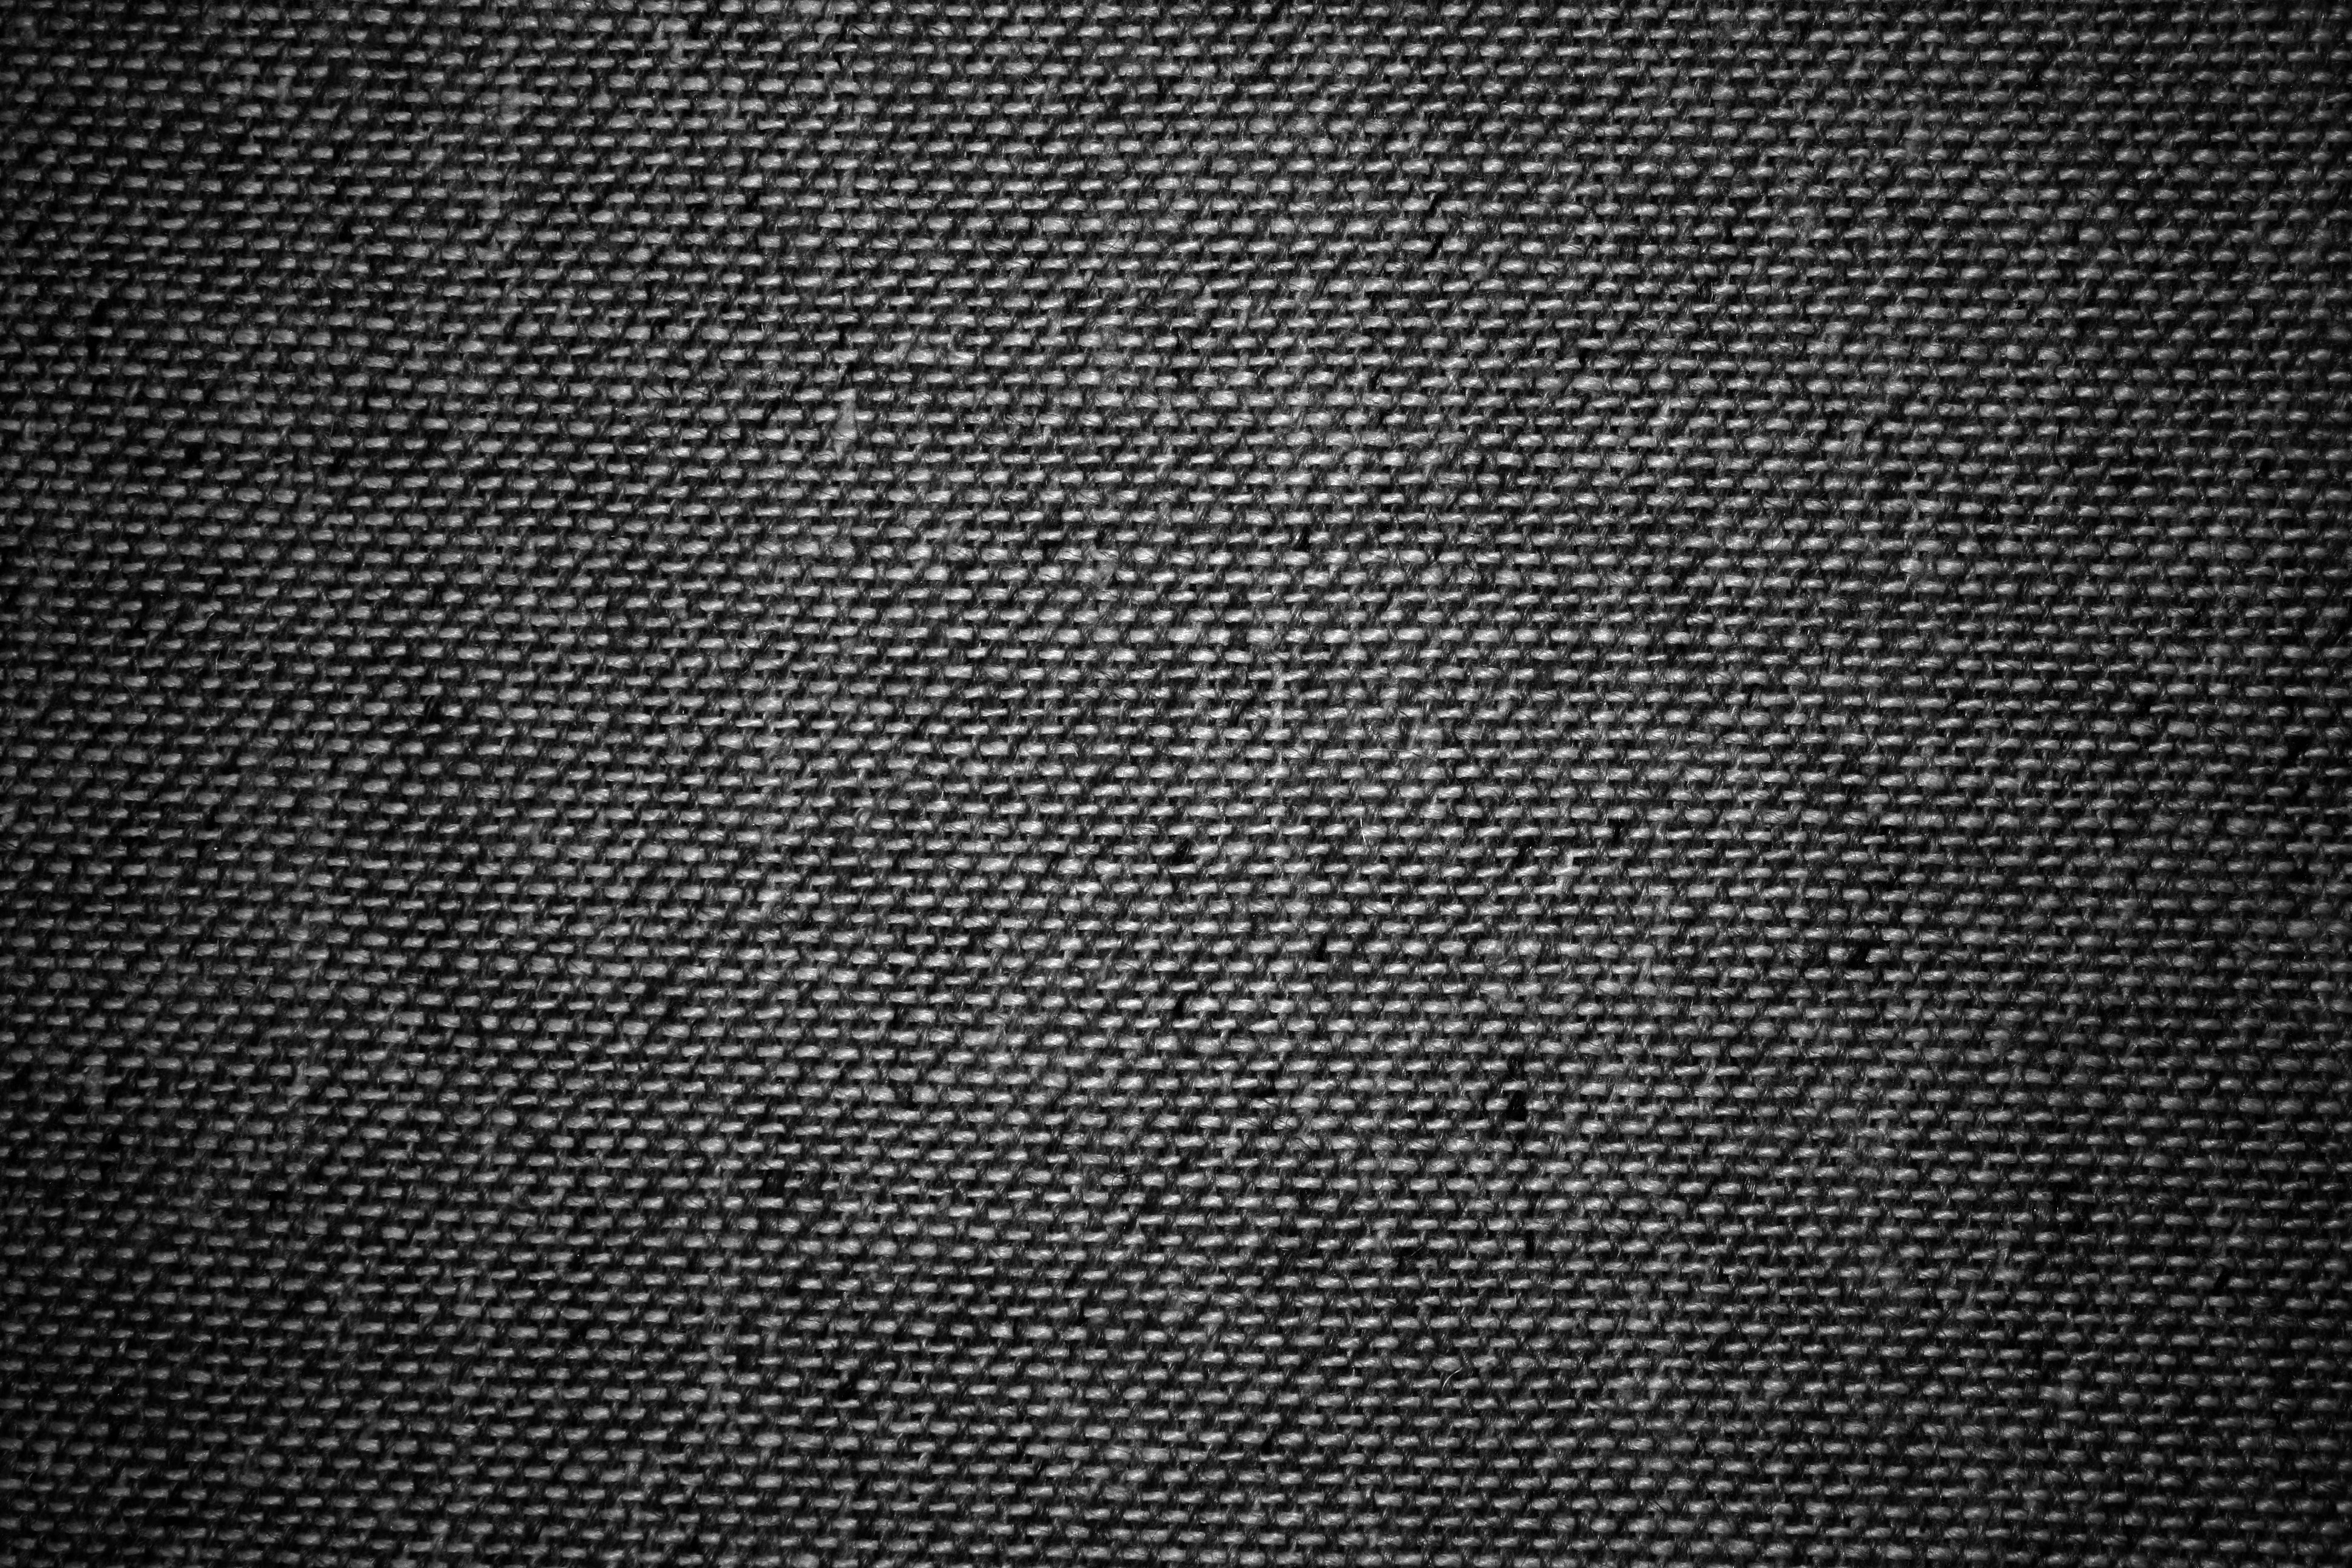 Black and White Textured Fabric